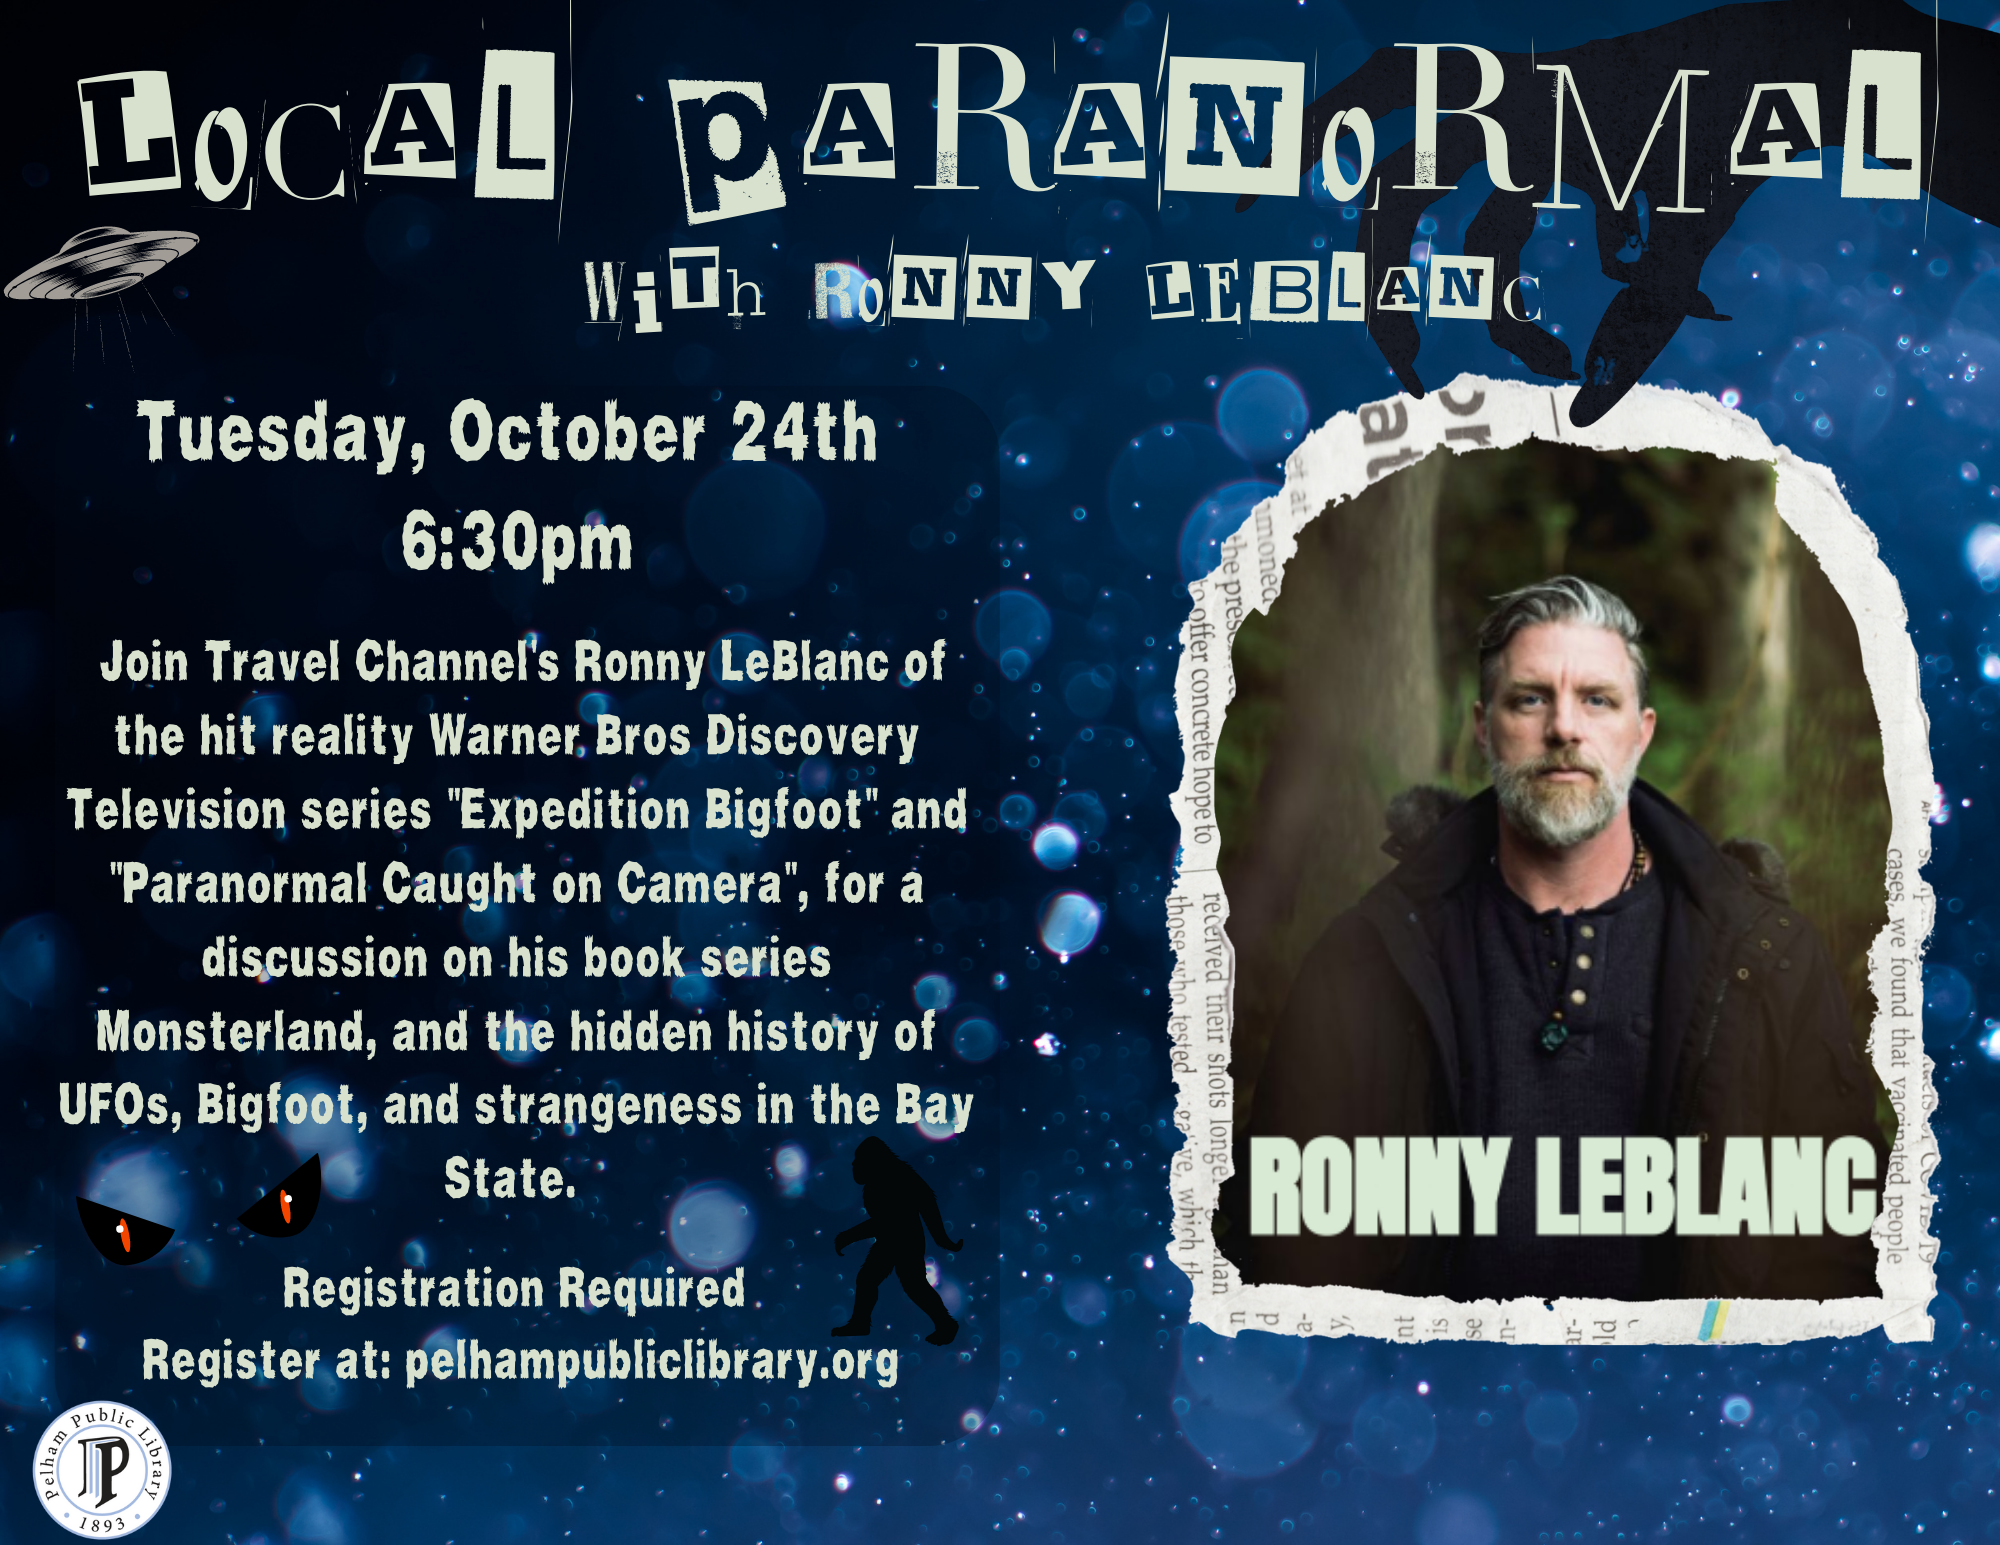 Local Paranormal with Ronny LeBlanc, Tues. Oct 24th, 6:30pm